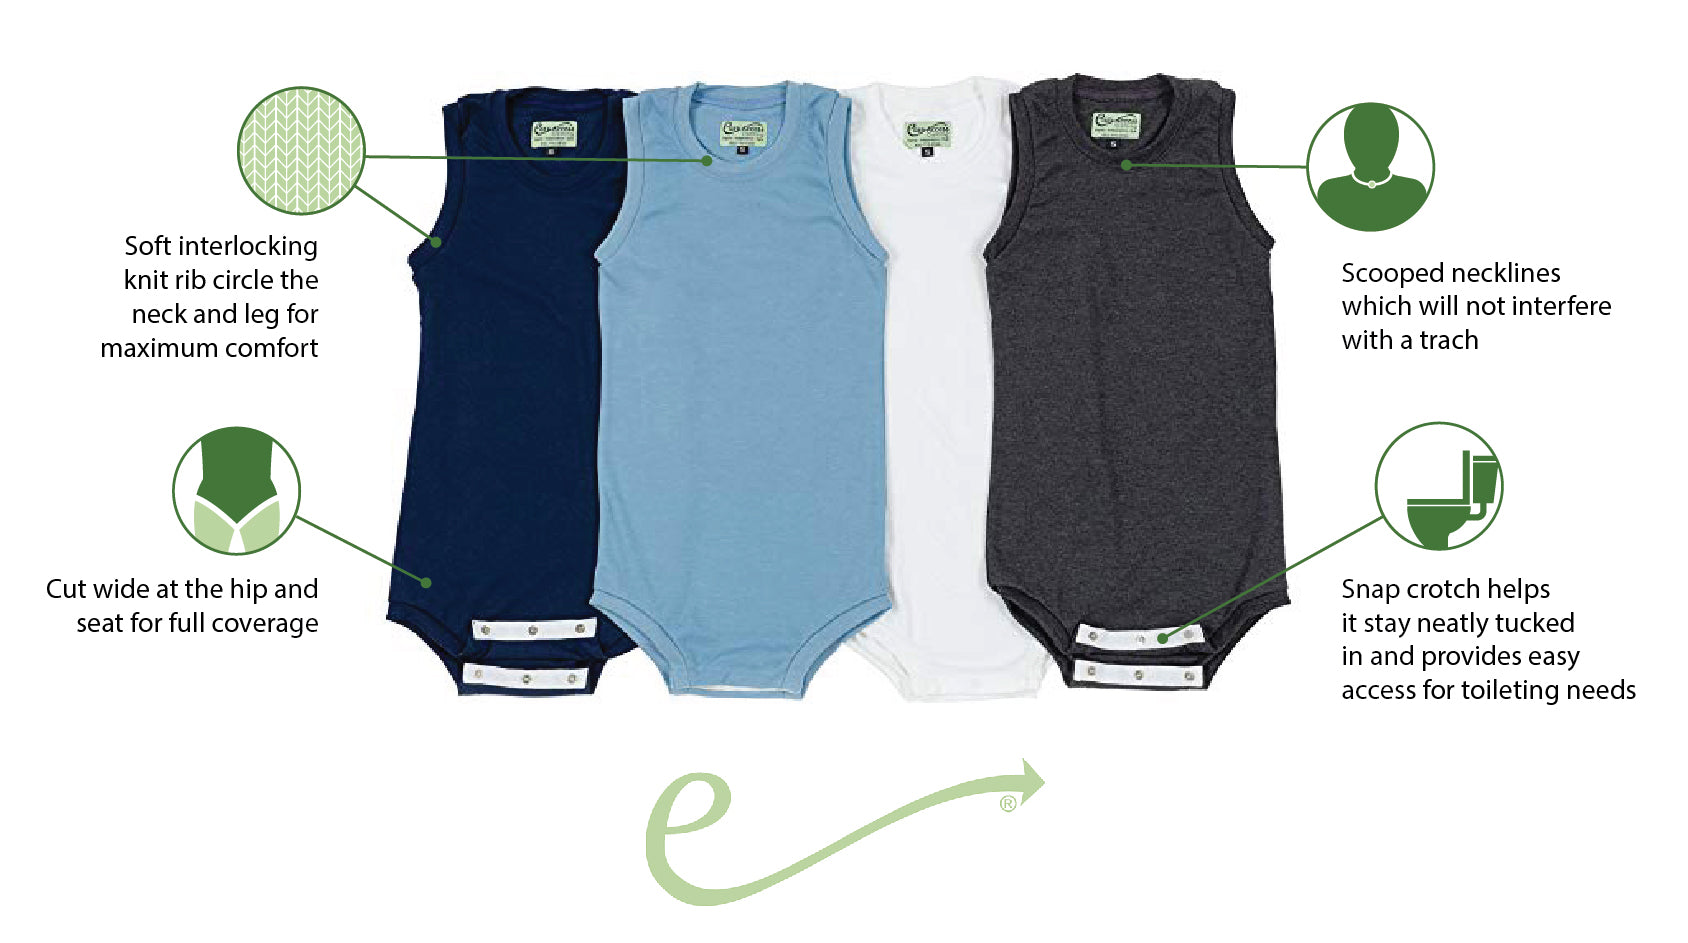 Easy access clothing features on children collection